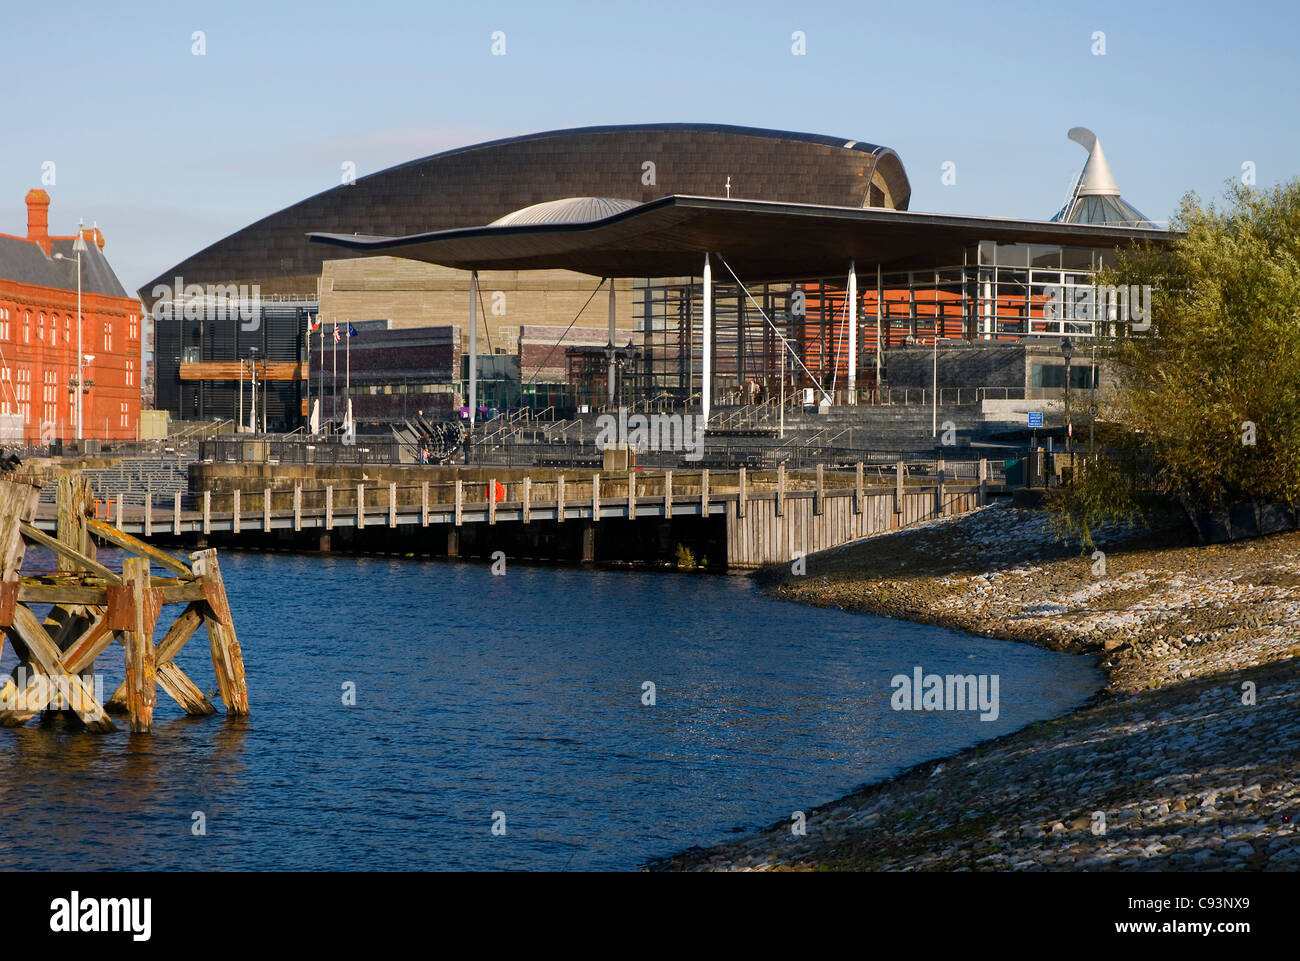 The Welsh Assembly debating chamber, or Senedd, Cardiff, with Millennium centre behind Stock Photo